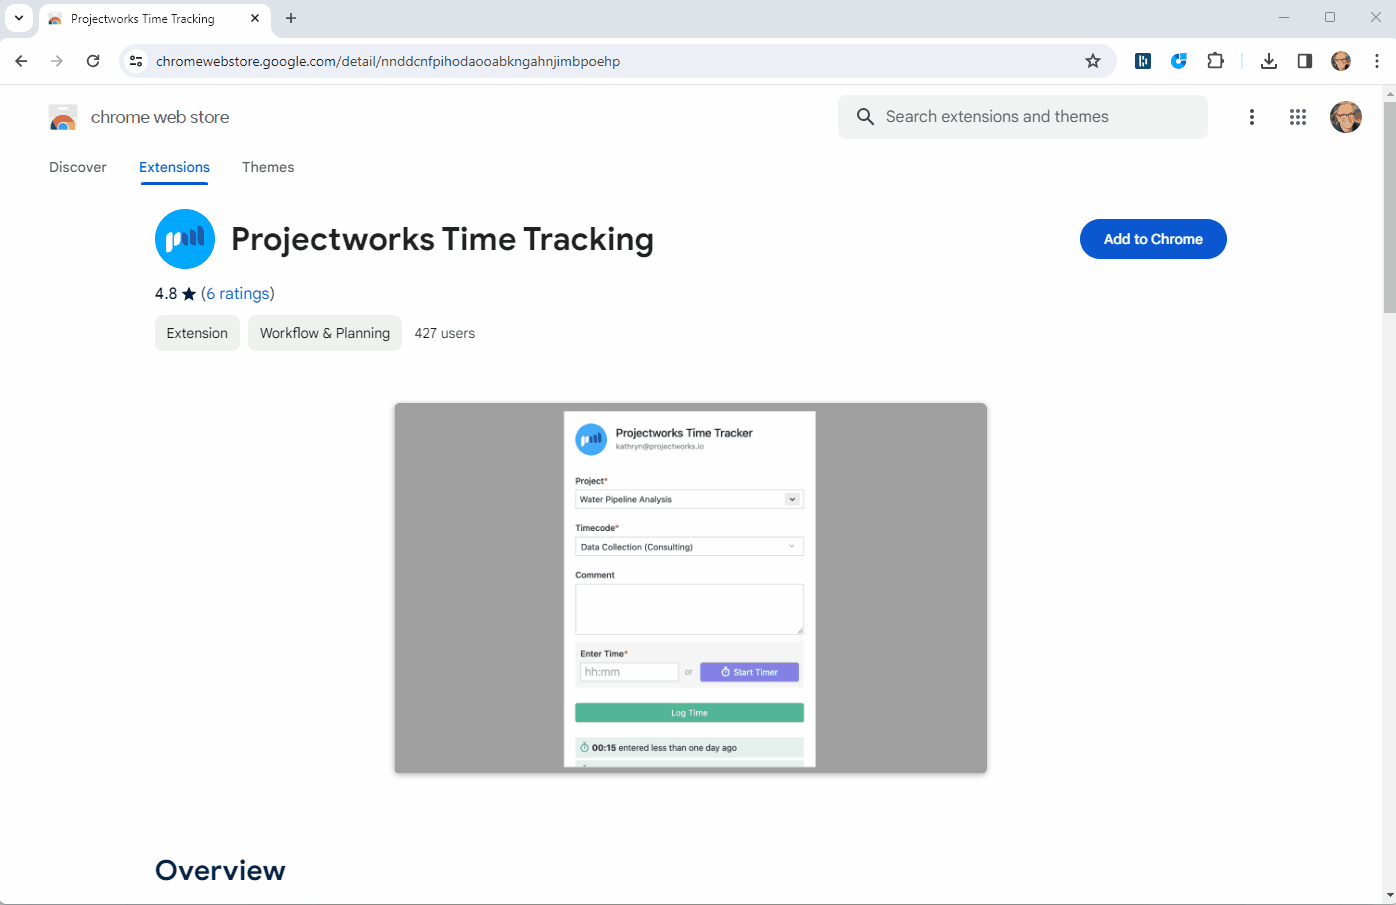 Install the Projectworks Time Tracking extension from the Chrome web store